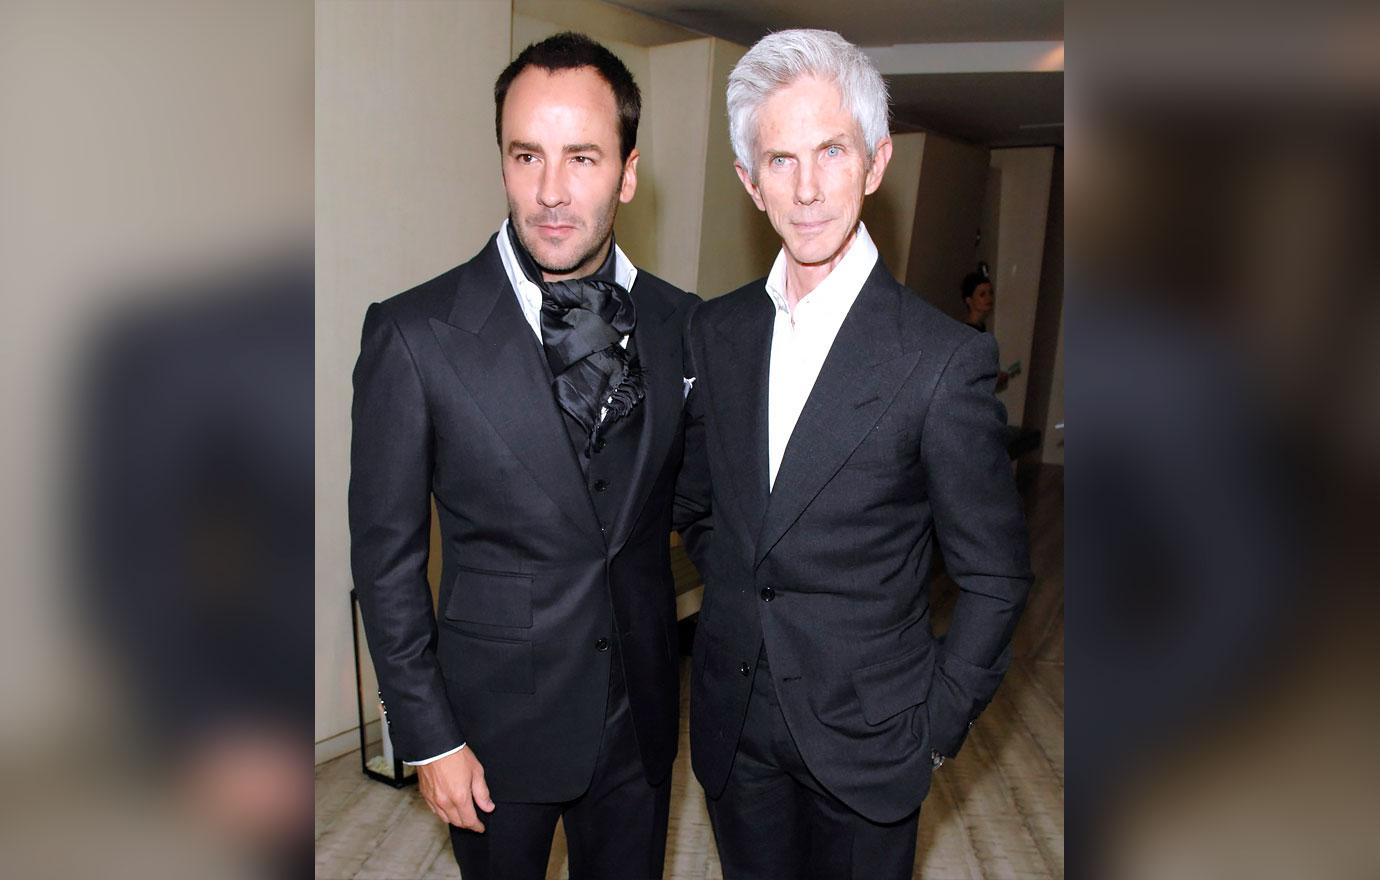 Tom Ford and Richard Buckley married: Fashion designer reveals he